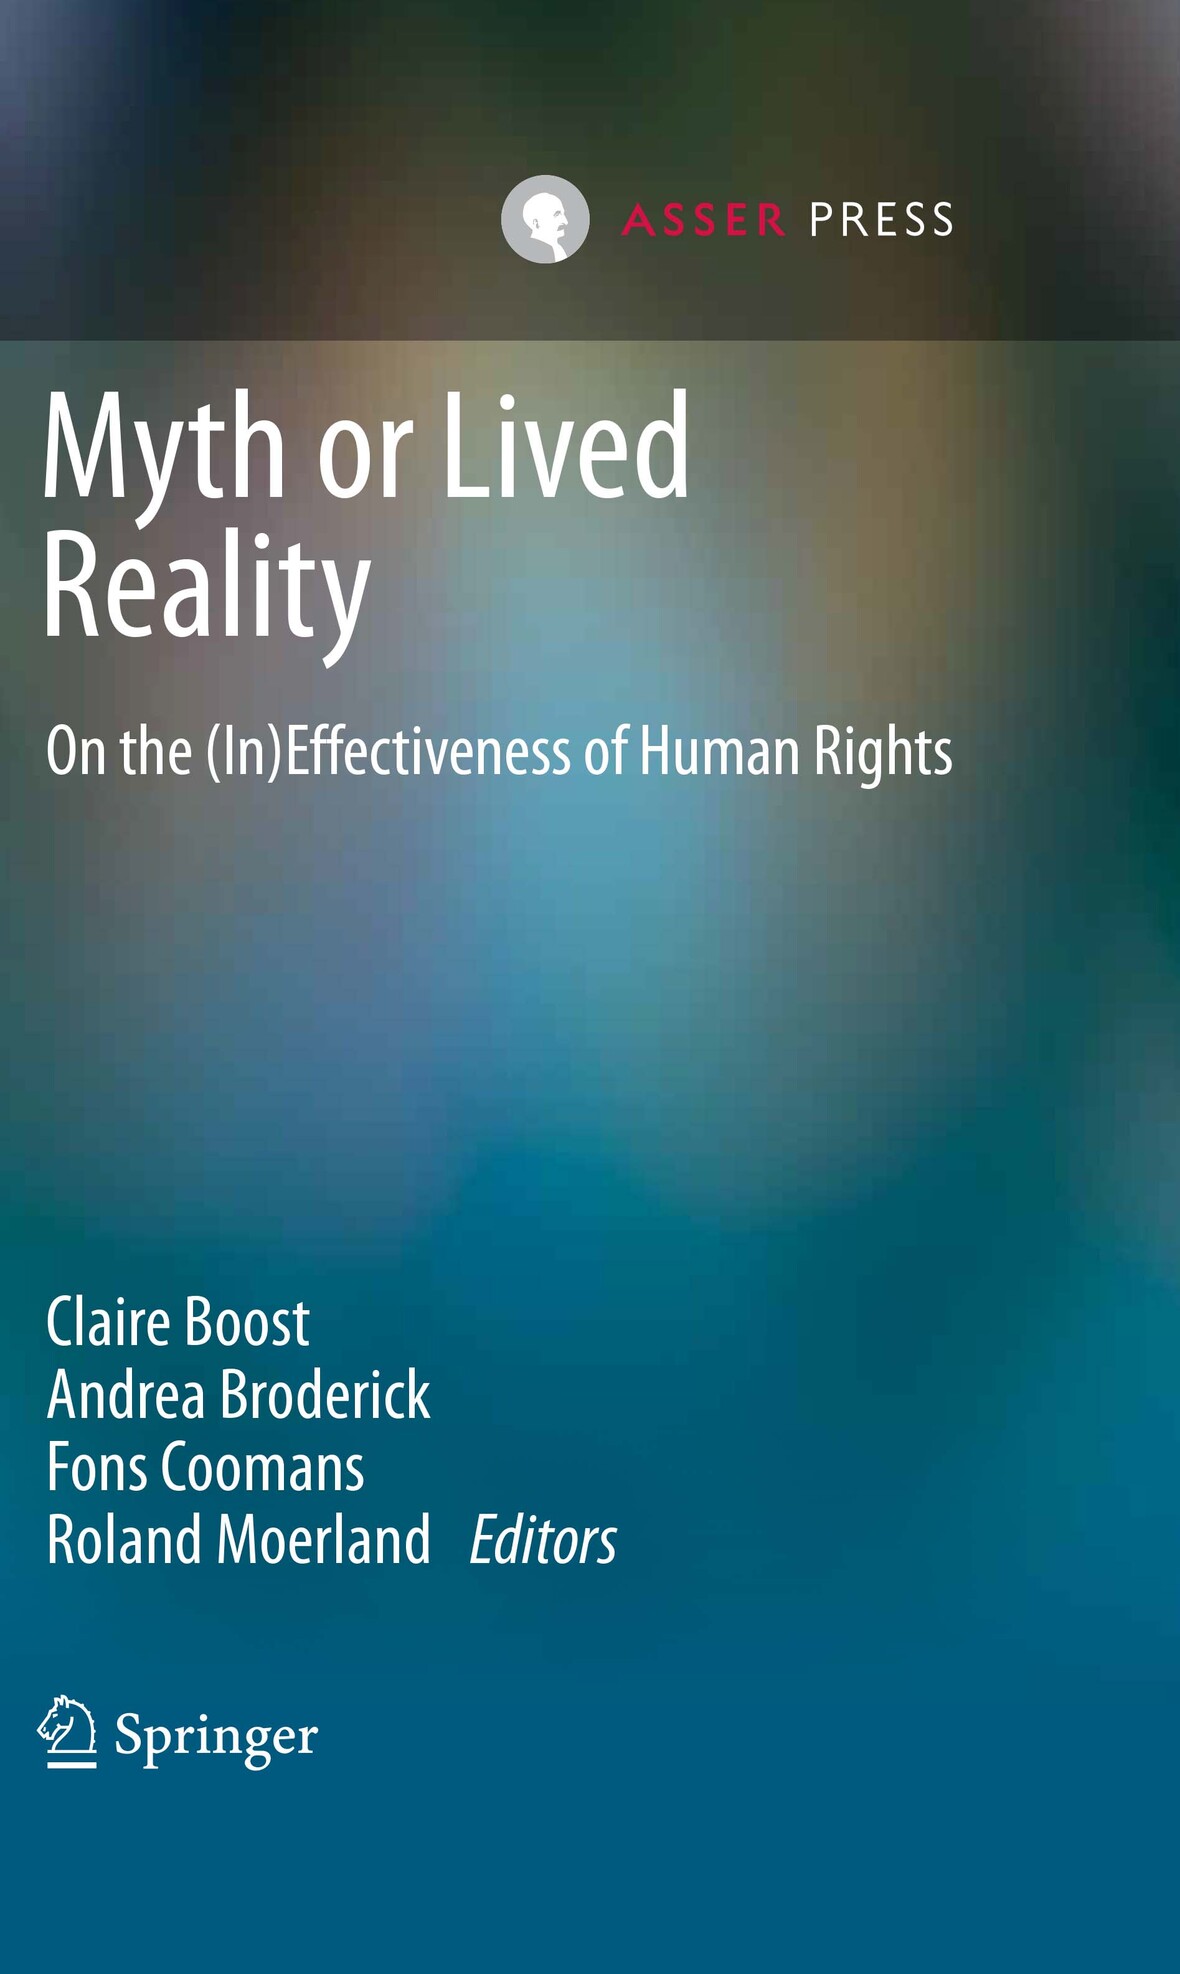 Book cover with abstract image and the title 'Myth or Lived Reality - On the (In)Effectiveness of Human Rights' 